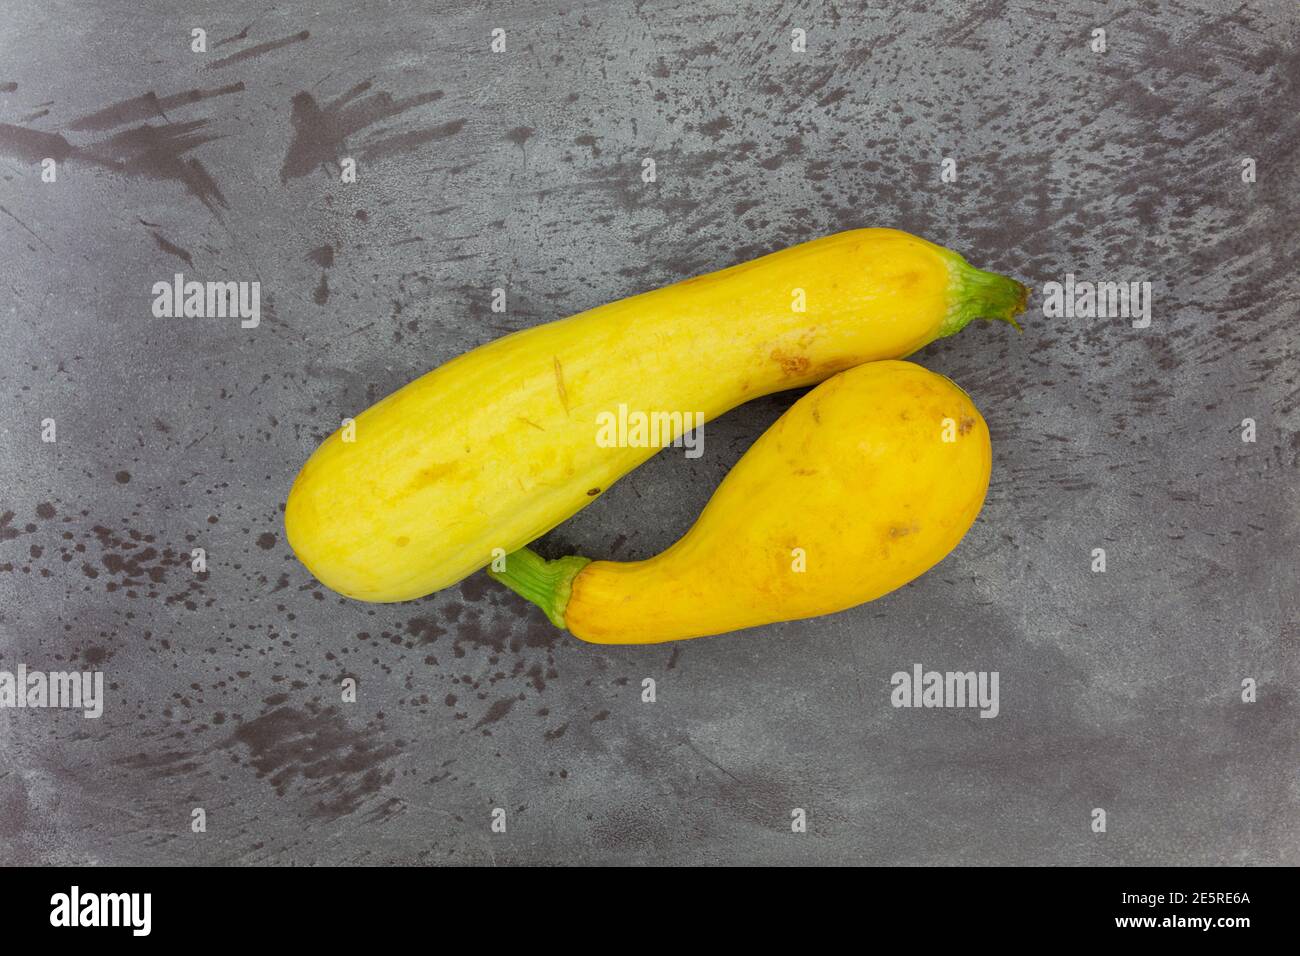 Top view of two home garden grown yellow summer squash on a gray mottled background. Stock Photo